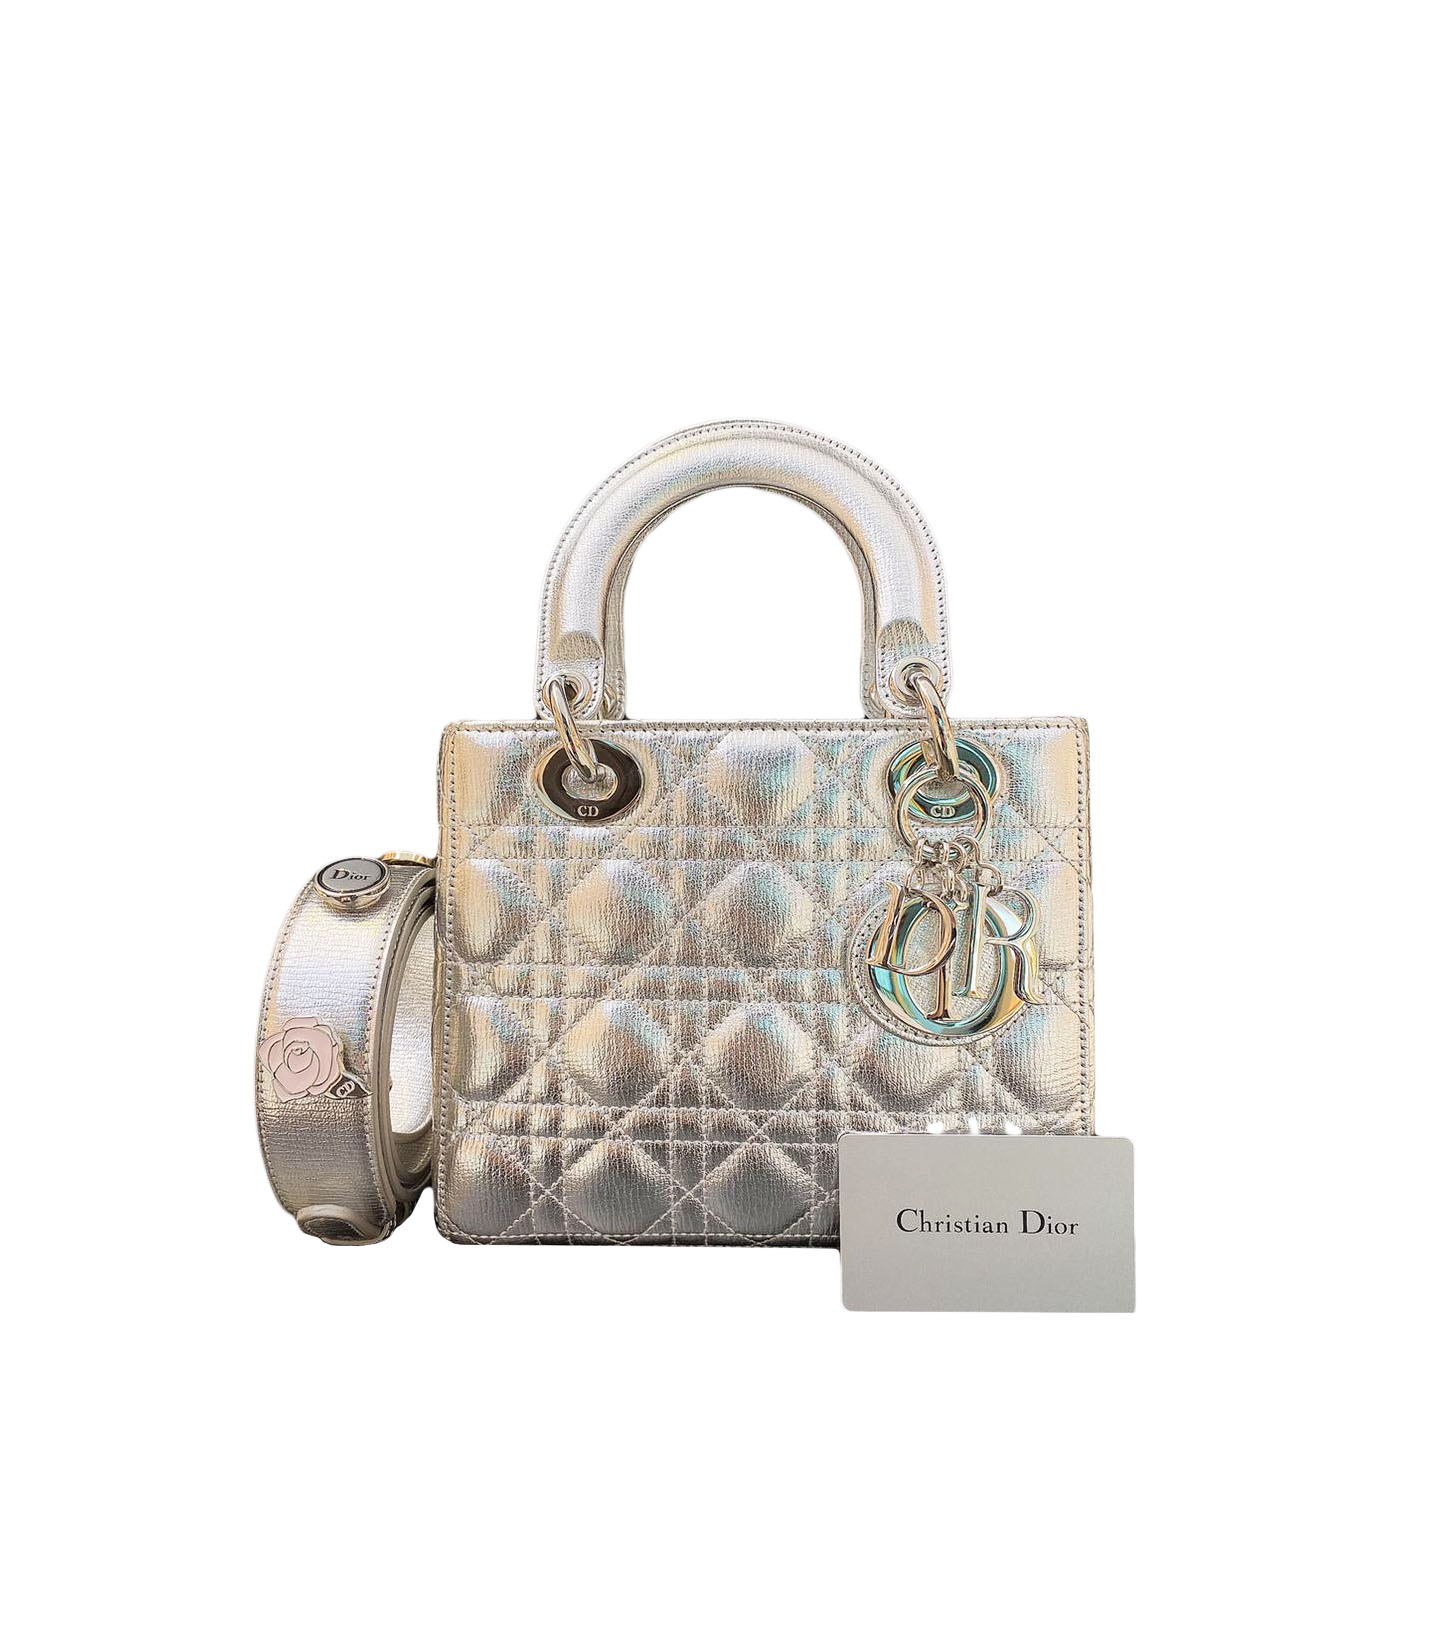 SILVER METALLIC GRAINED CALFSKIN CANNAGE LEATHER SMALL LADY DIOR BAG -  styleforless